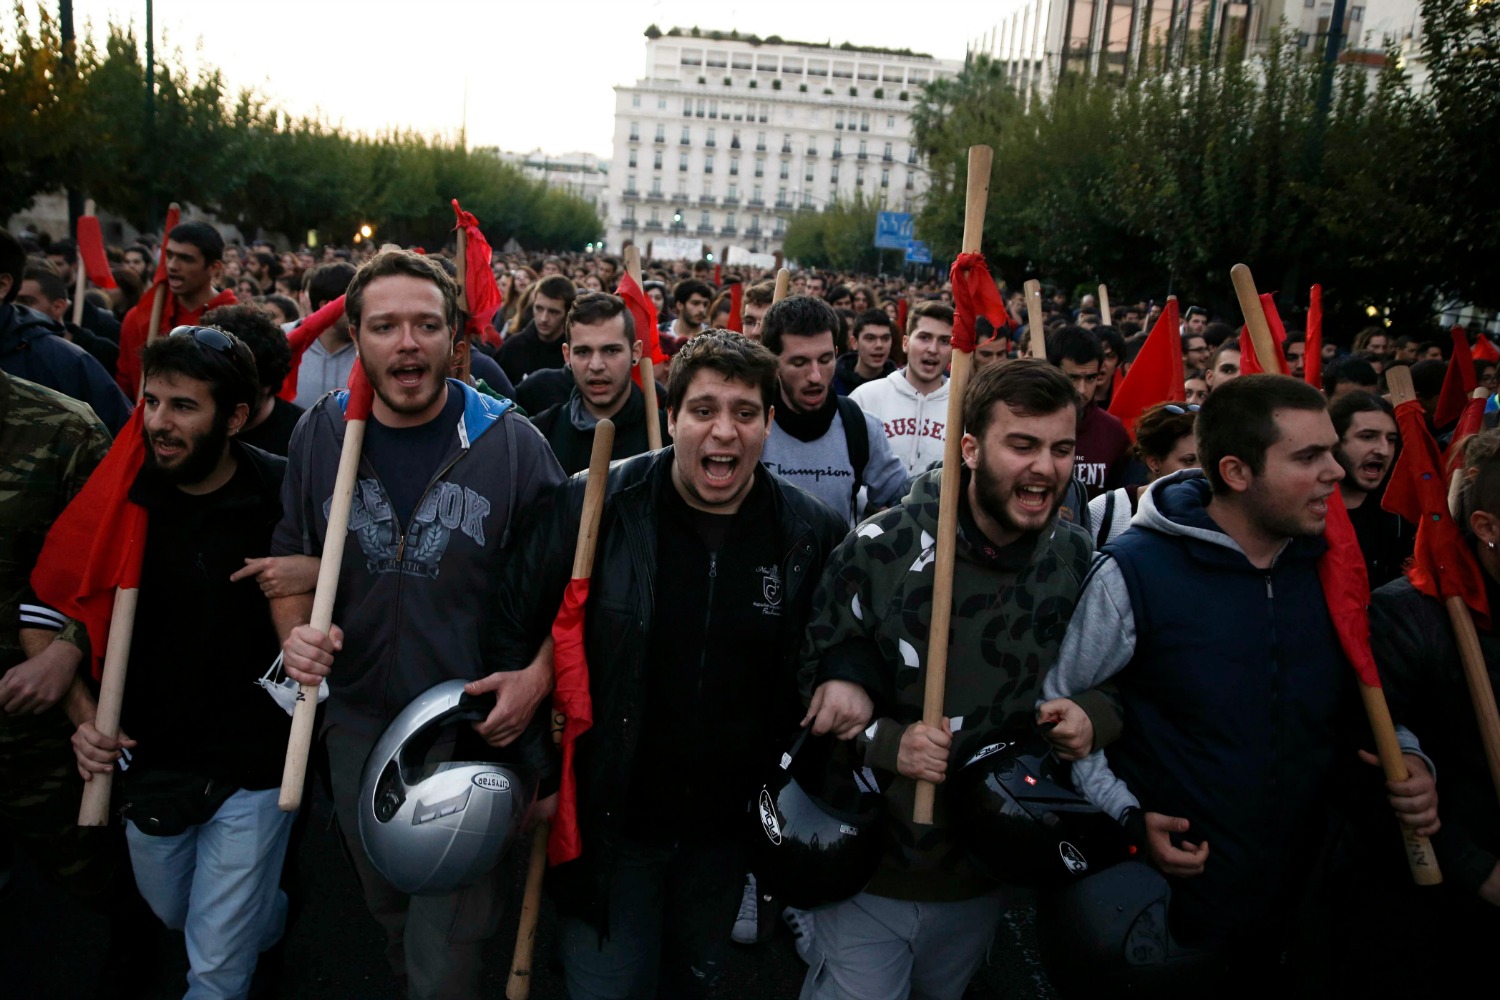 Students throw water bottles at Syriza ministers